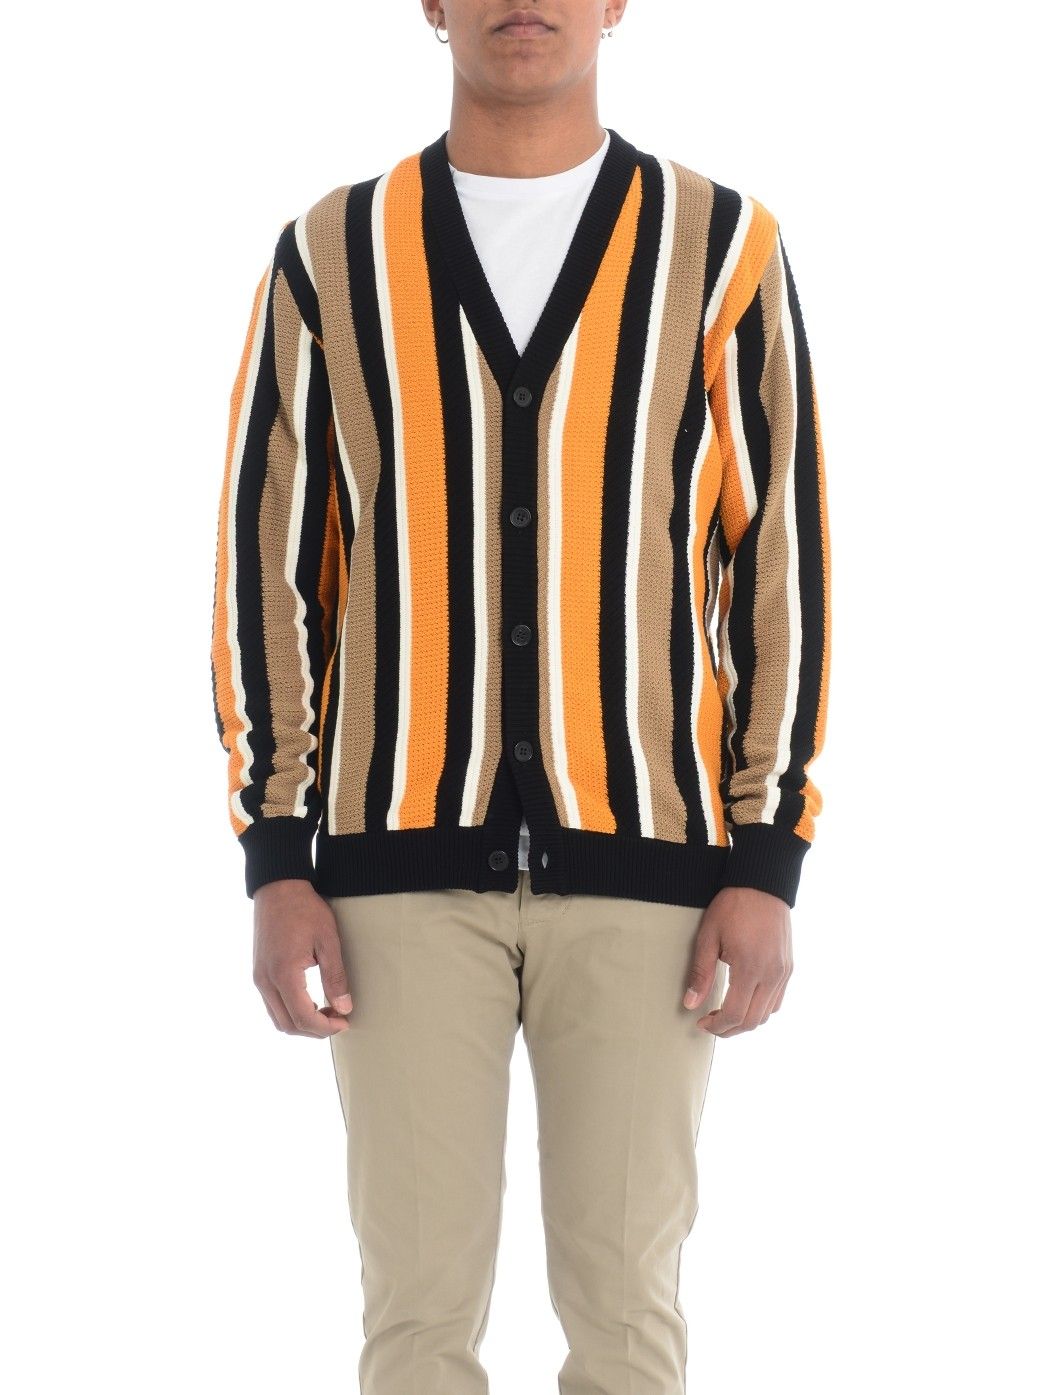  ROBERTO COLLINA,ROBERTO COLLINA SWEATER,ROBERTO COLLINA KNITWEAR,ROBERTO COLLINA CARDIGAN,ROBERTO COLLINA 2022,ROBERTO COLLINA FALL WINTER 2022  ROBERTO COLLINA RE12010